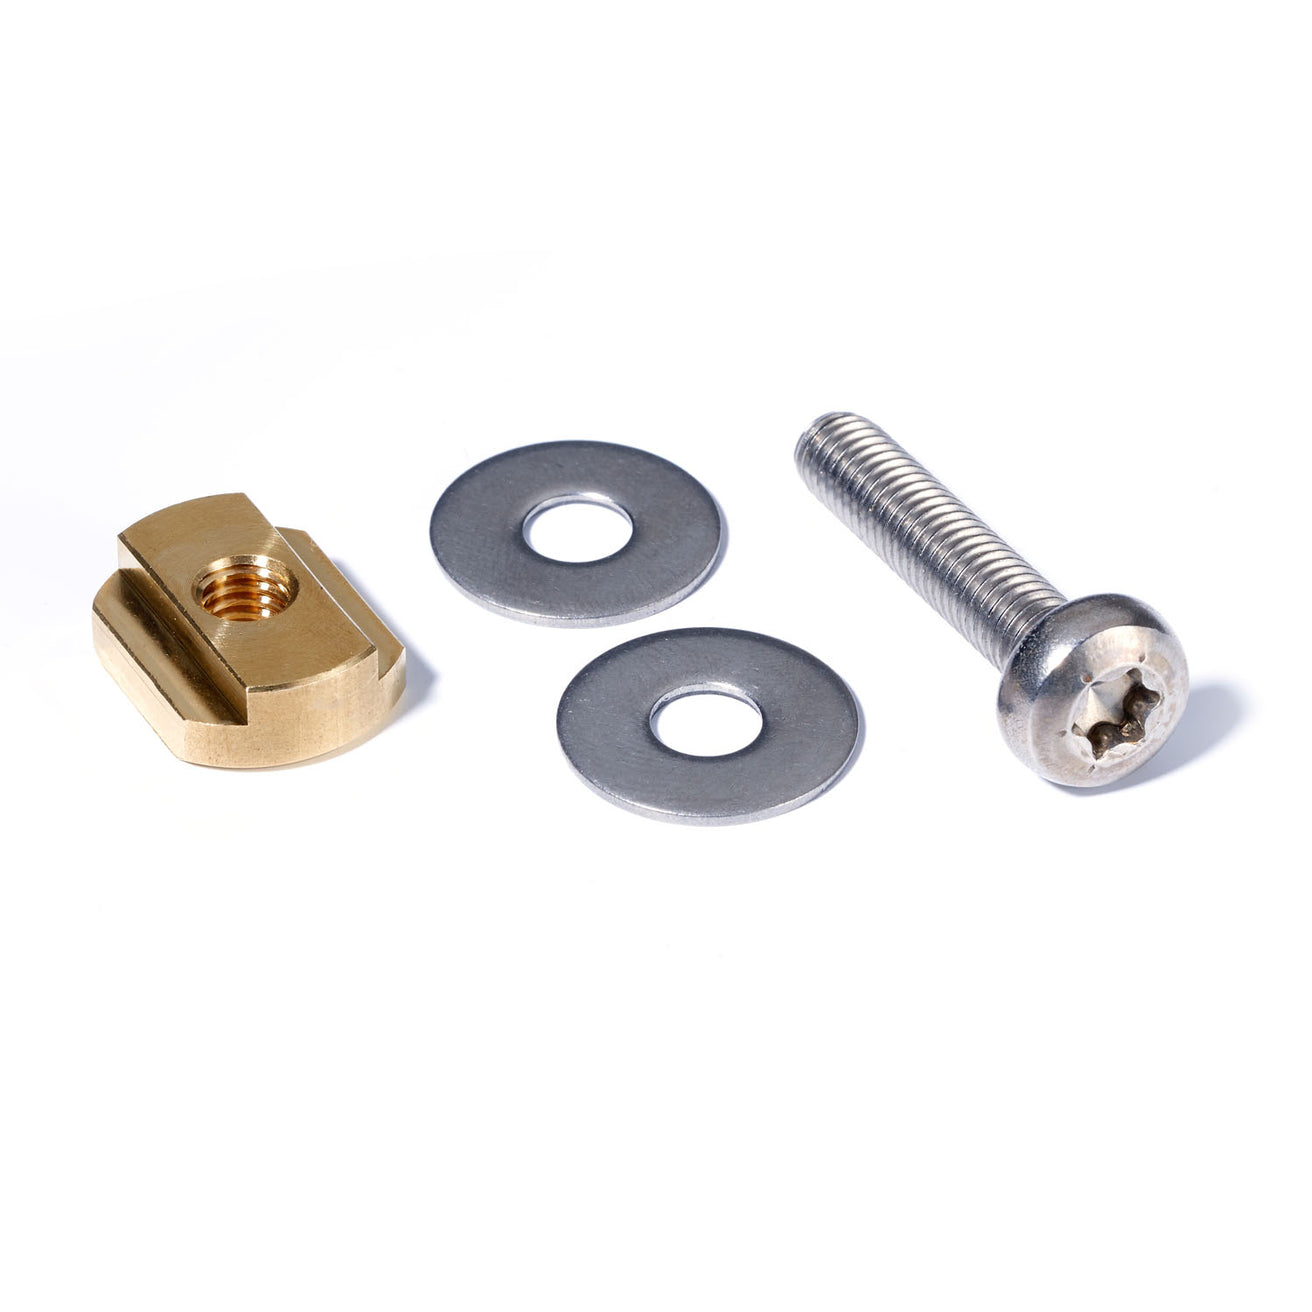 GONG | Foil Allvator Brass And Nut For Top Plate